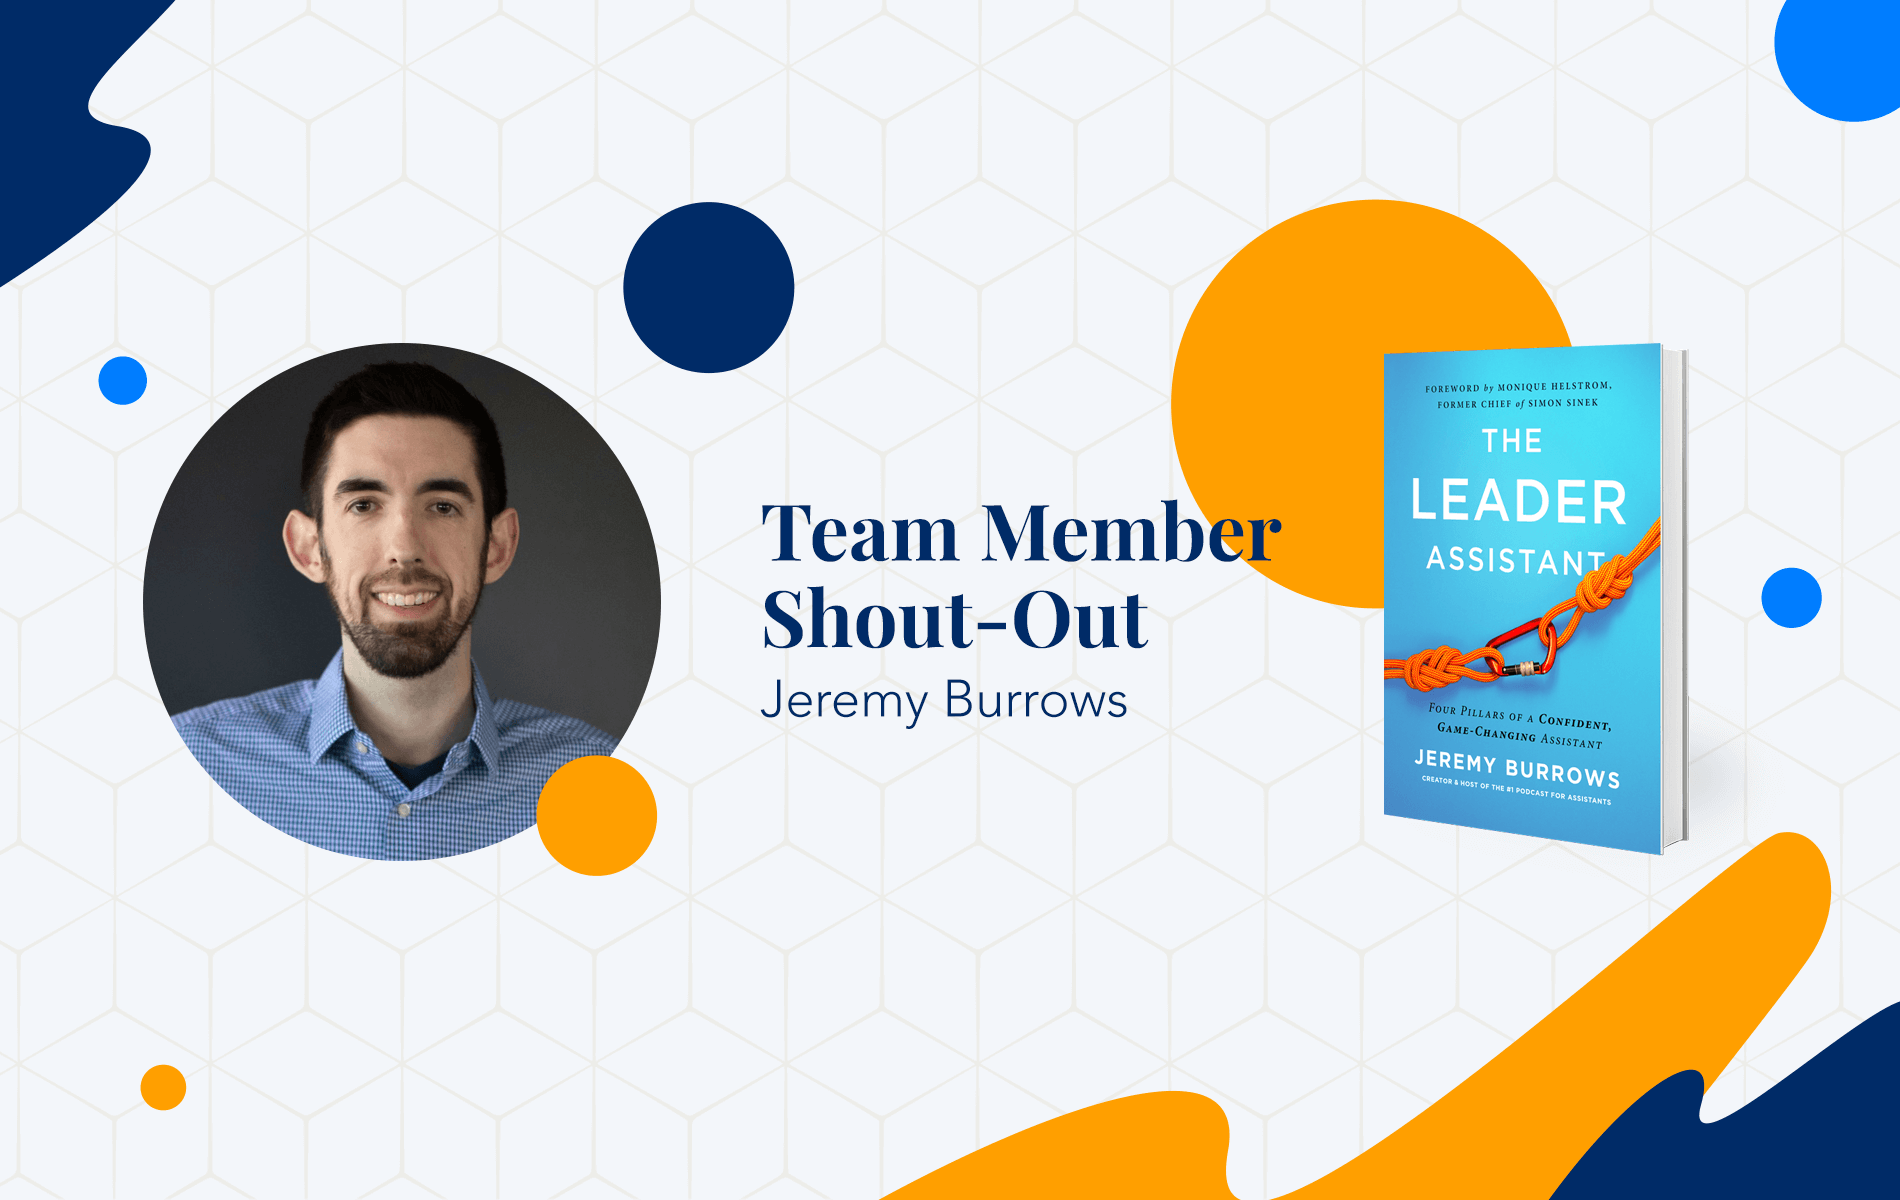 Team Member Shout-Out: Jeremy Burrows